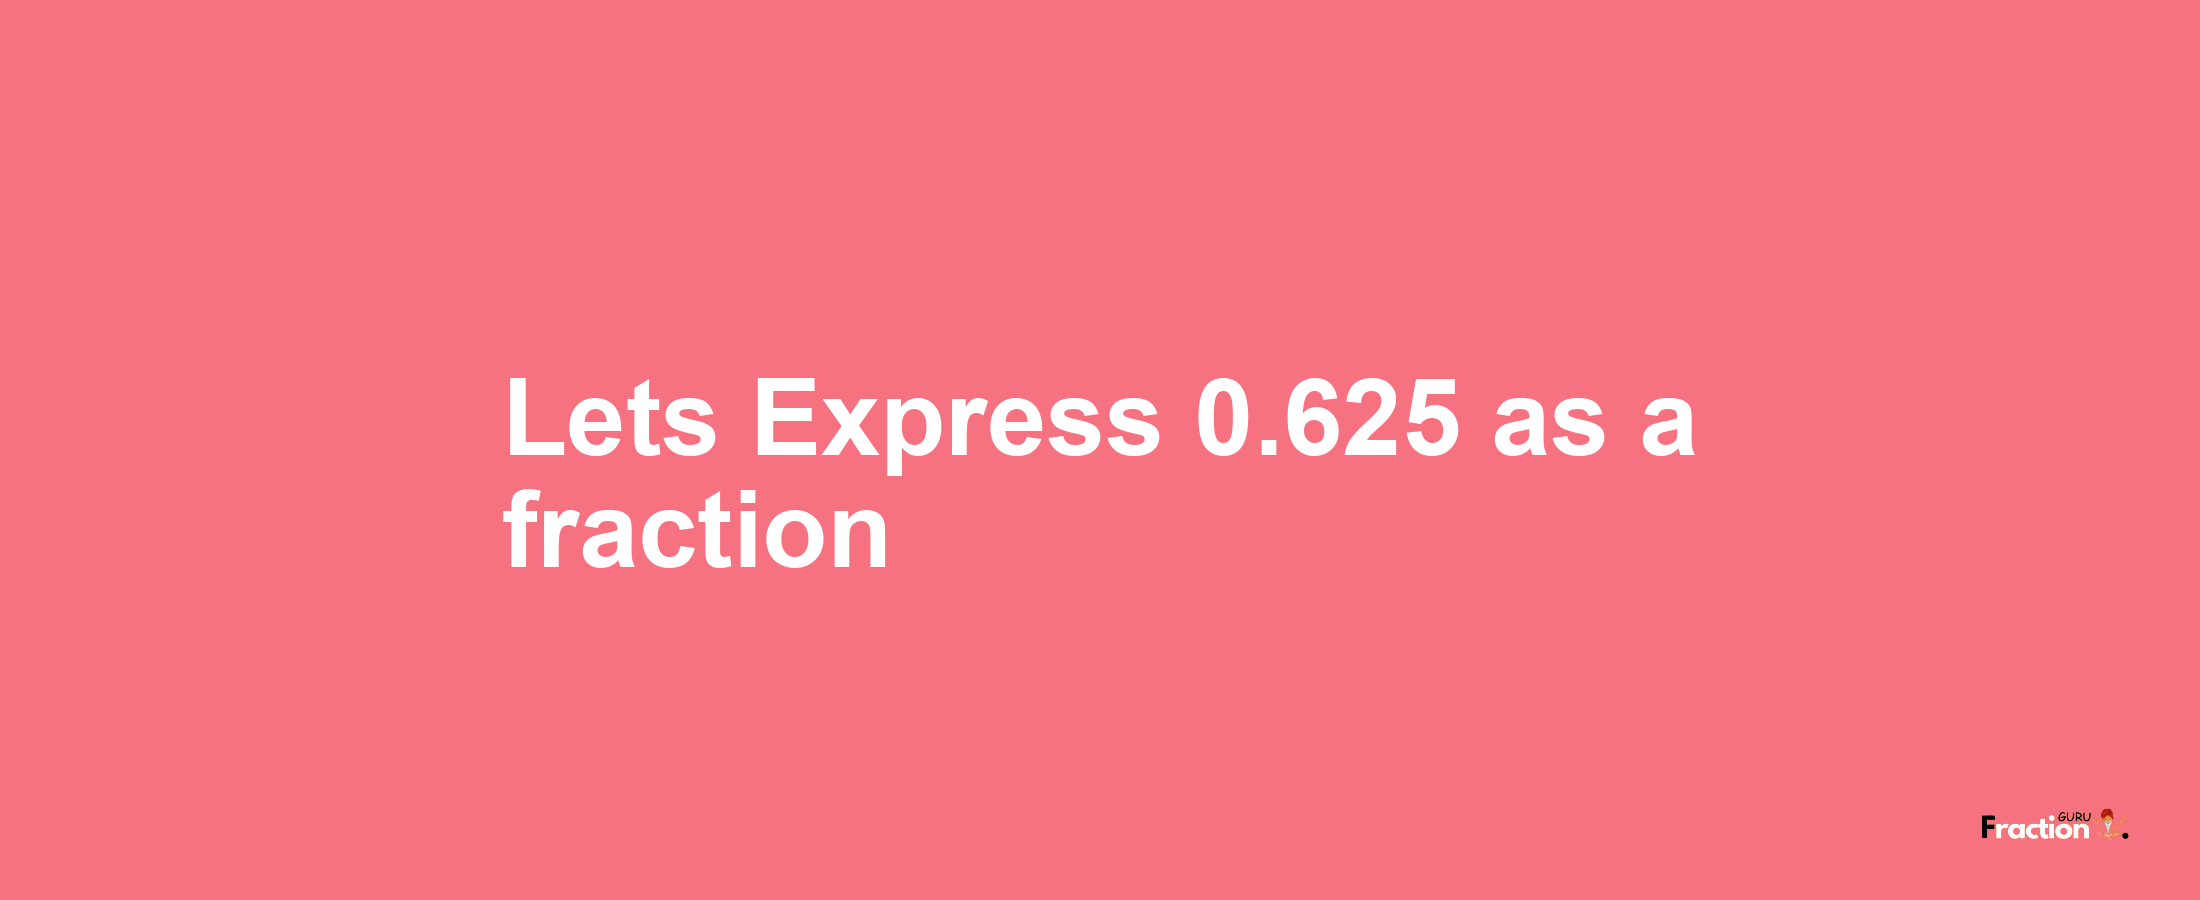 Lets Express 0.625 as afraction